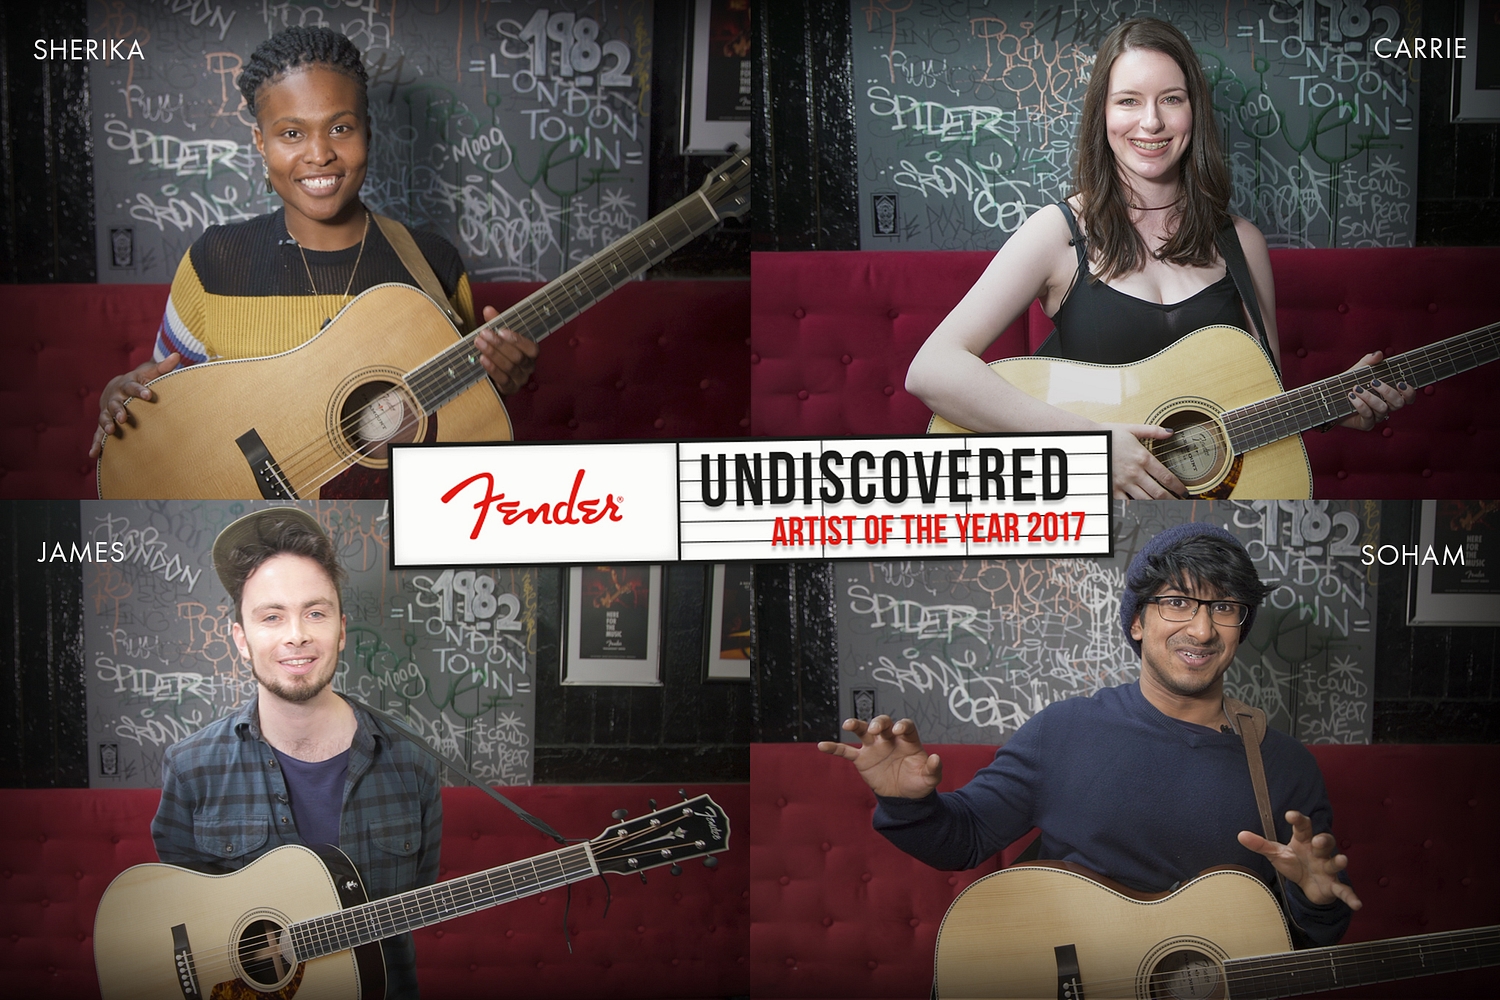 ​Meet the latest four semi-finalists for Fender’s Undiscovered Artist of The Year 2017